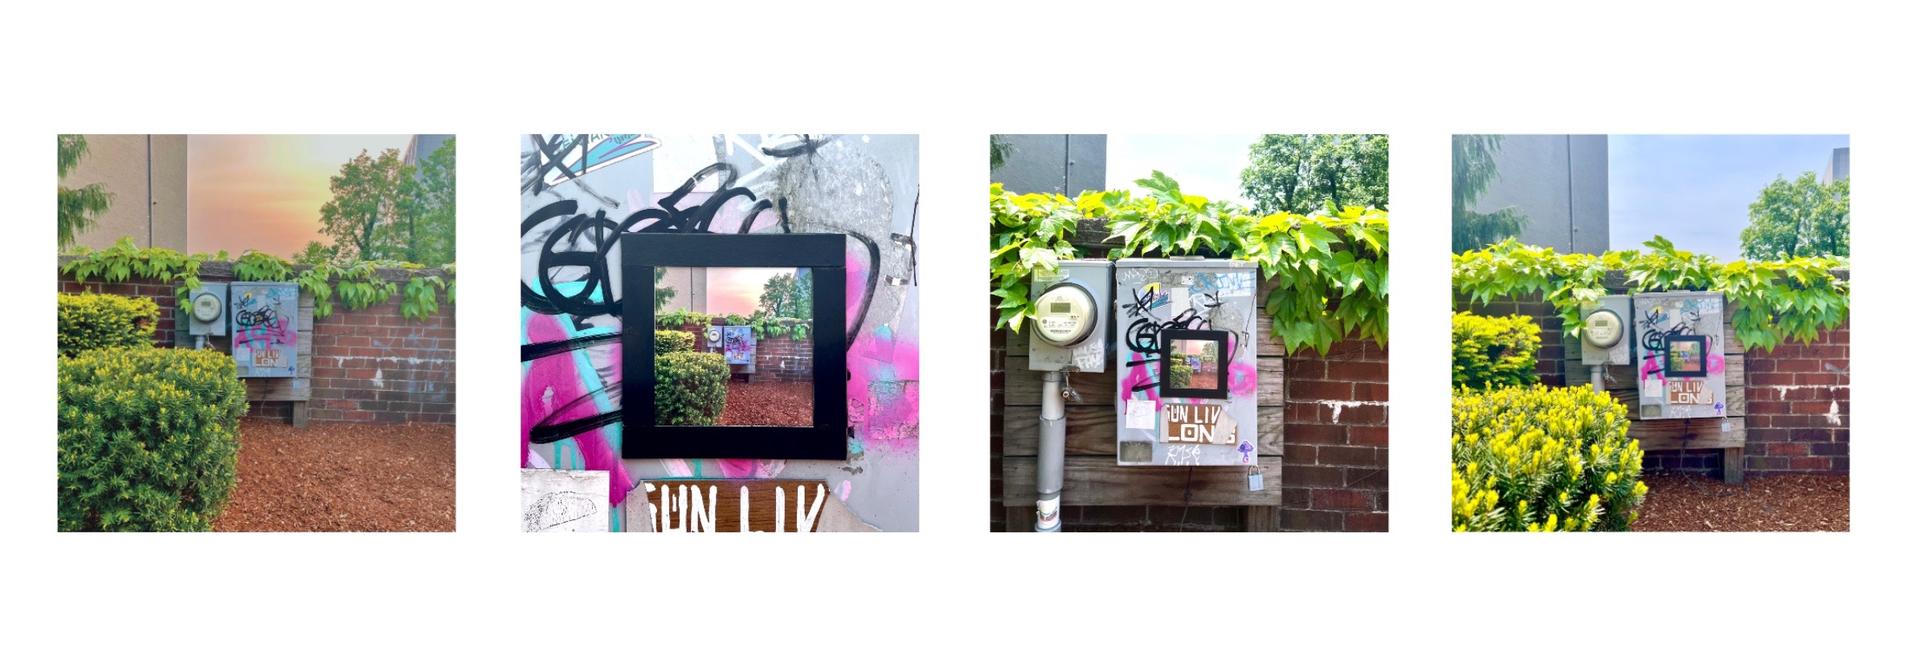 A series of 4 images of a utility box, a photograph of the site has been printed, framed, and hung on the site.